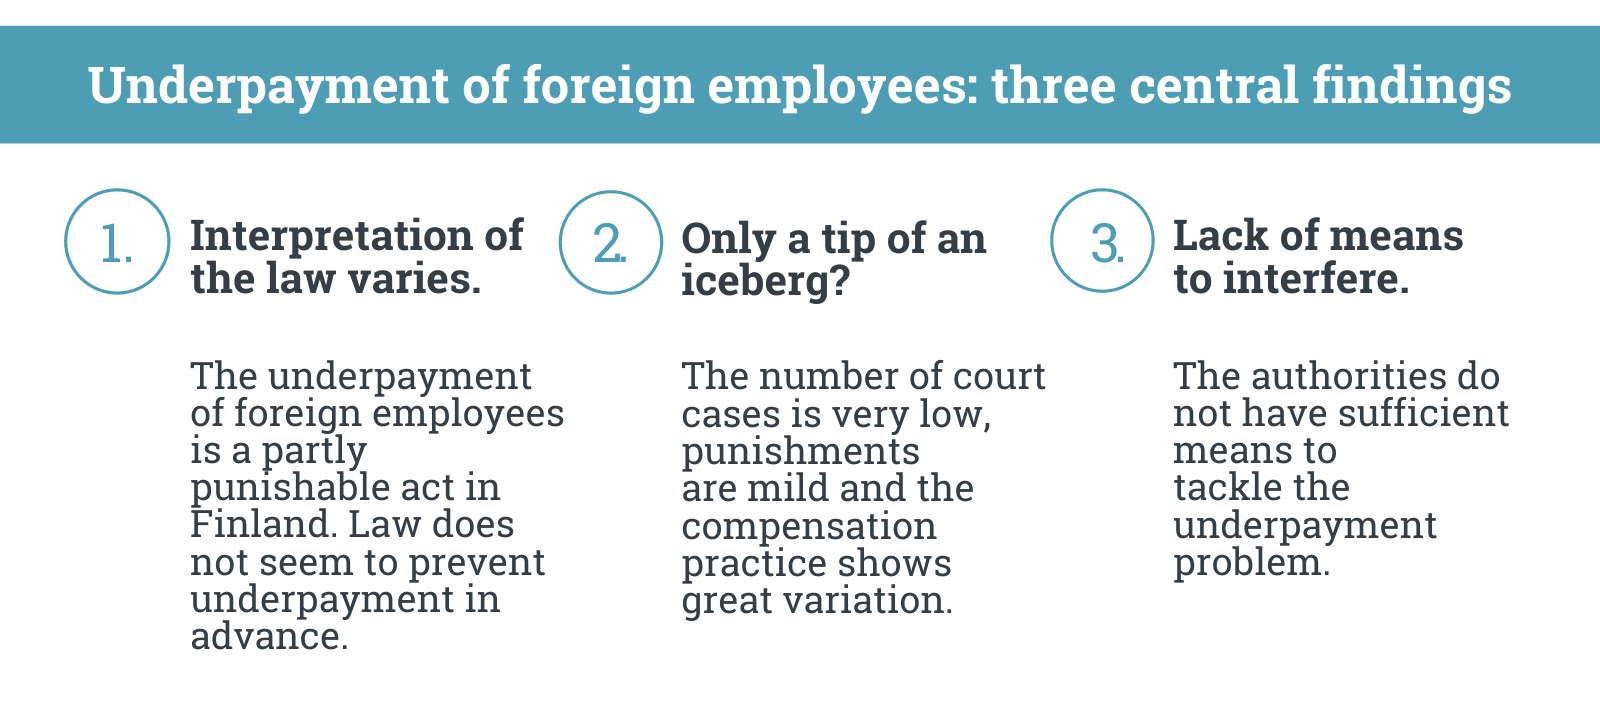 Underpayment of foreign employees: three central findings 1. Interpretation of the law varies, 2. Only a tip of an iceberg? and 3. Lack of means to interfere